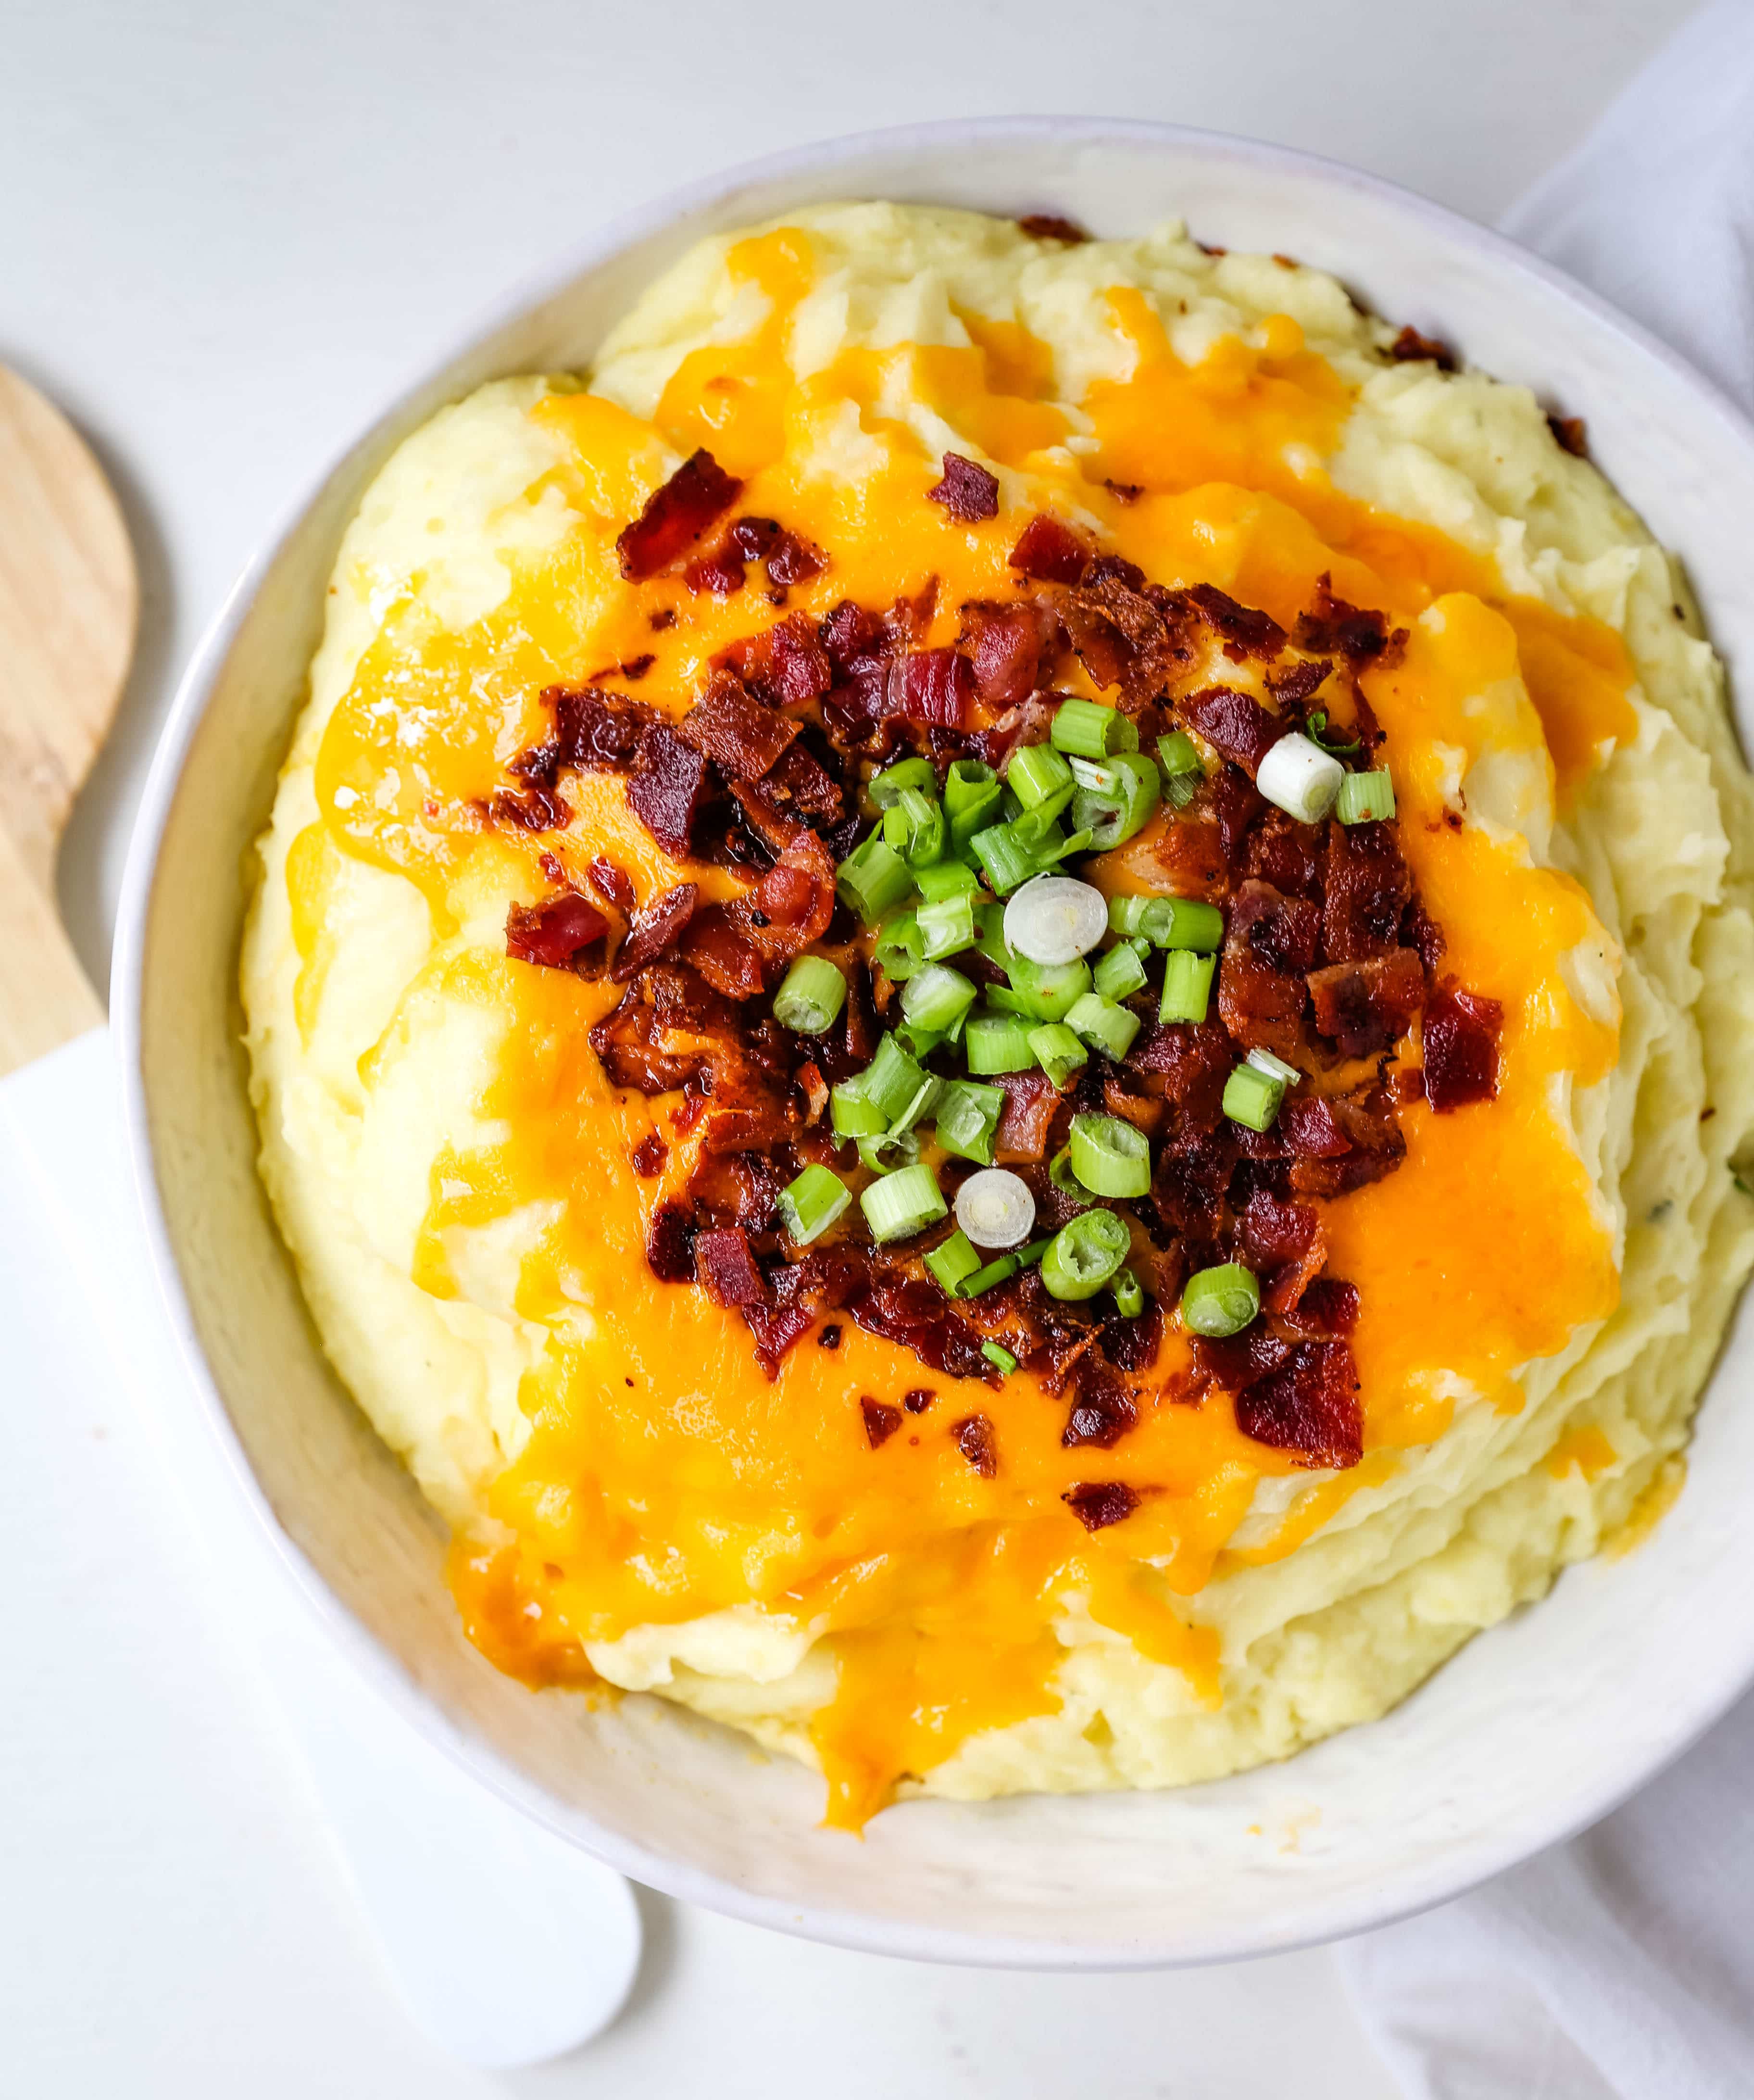 Loaded Mashed Potatoes. Creamy buttery mashed potatoes with sour cream, cheddar cheese, crispy bacon, and green onions. The perfect flavorful side dish that everyone loves! #mashedpotatoes #loadedmashedpotatoes #potatoes #sidedish